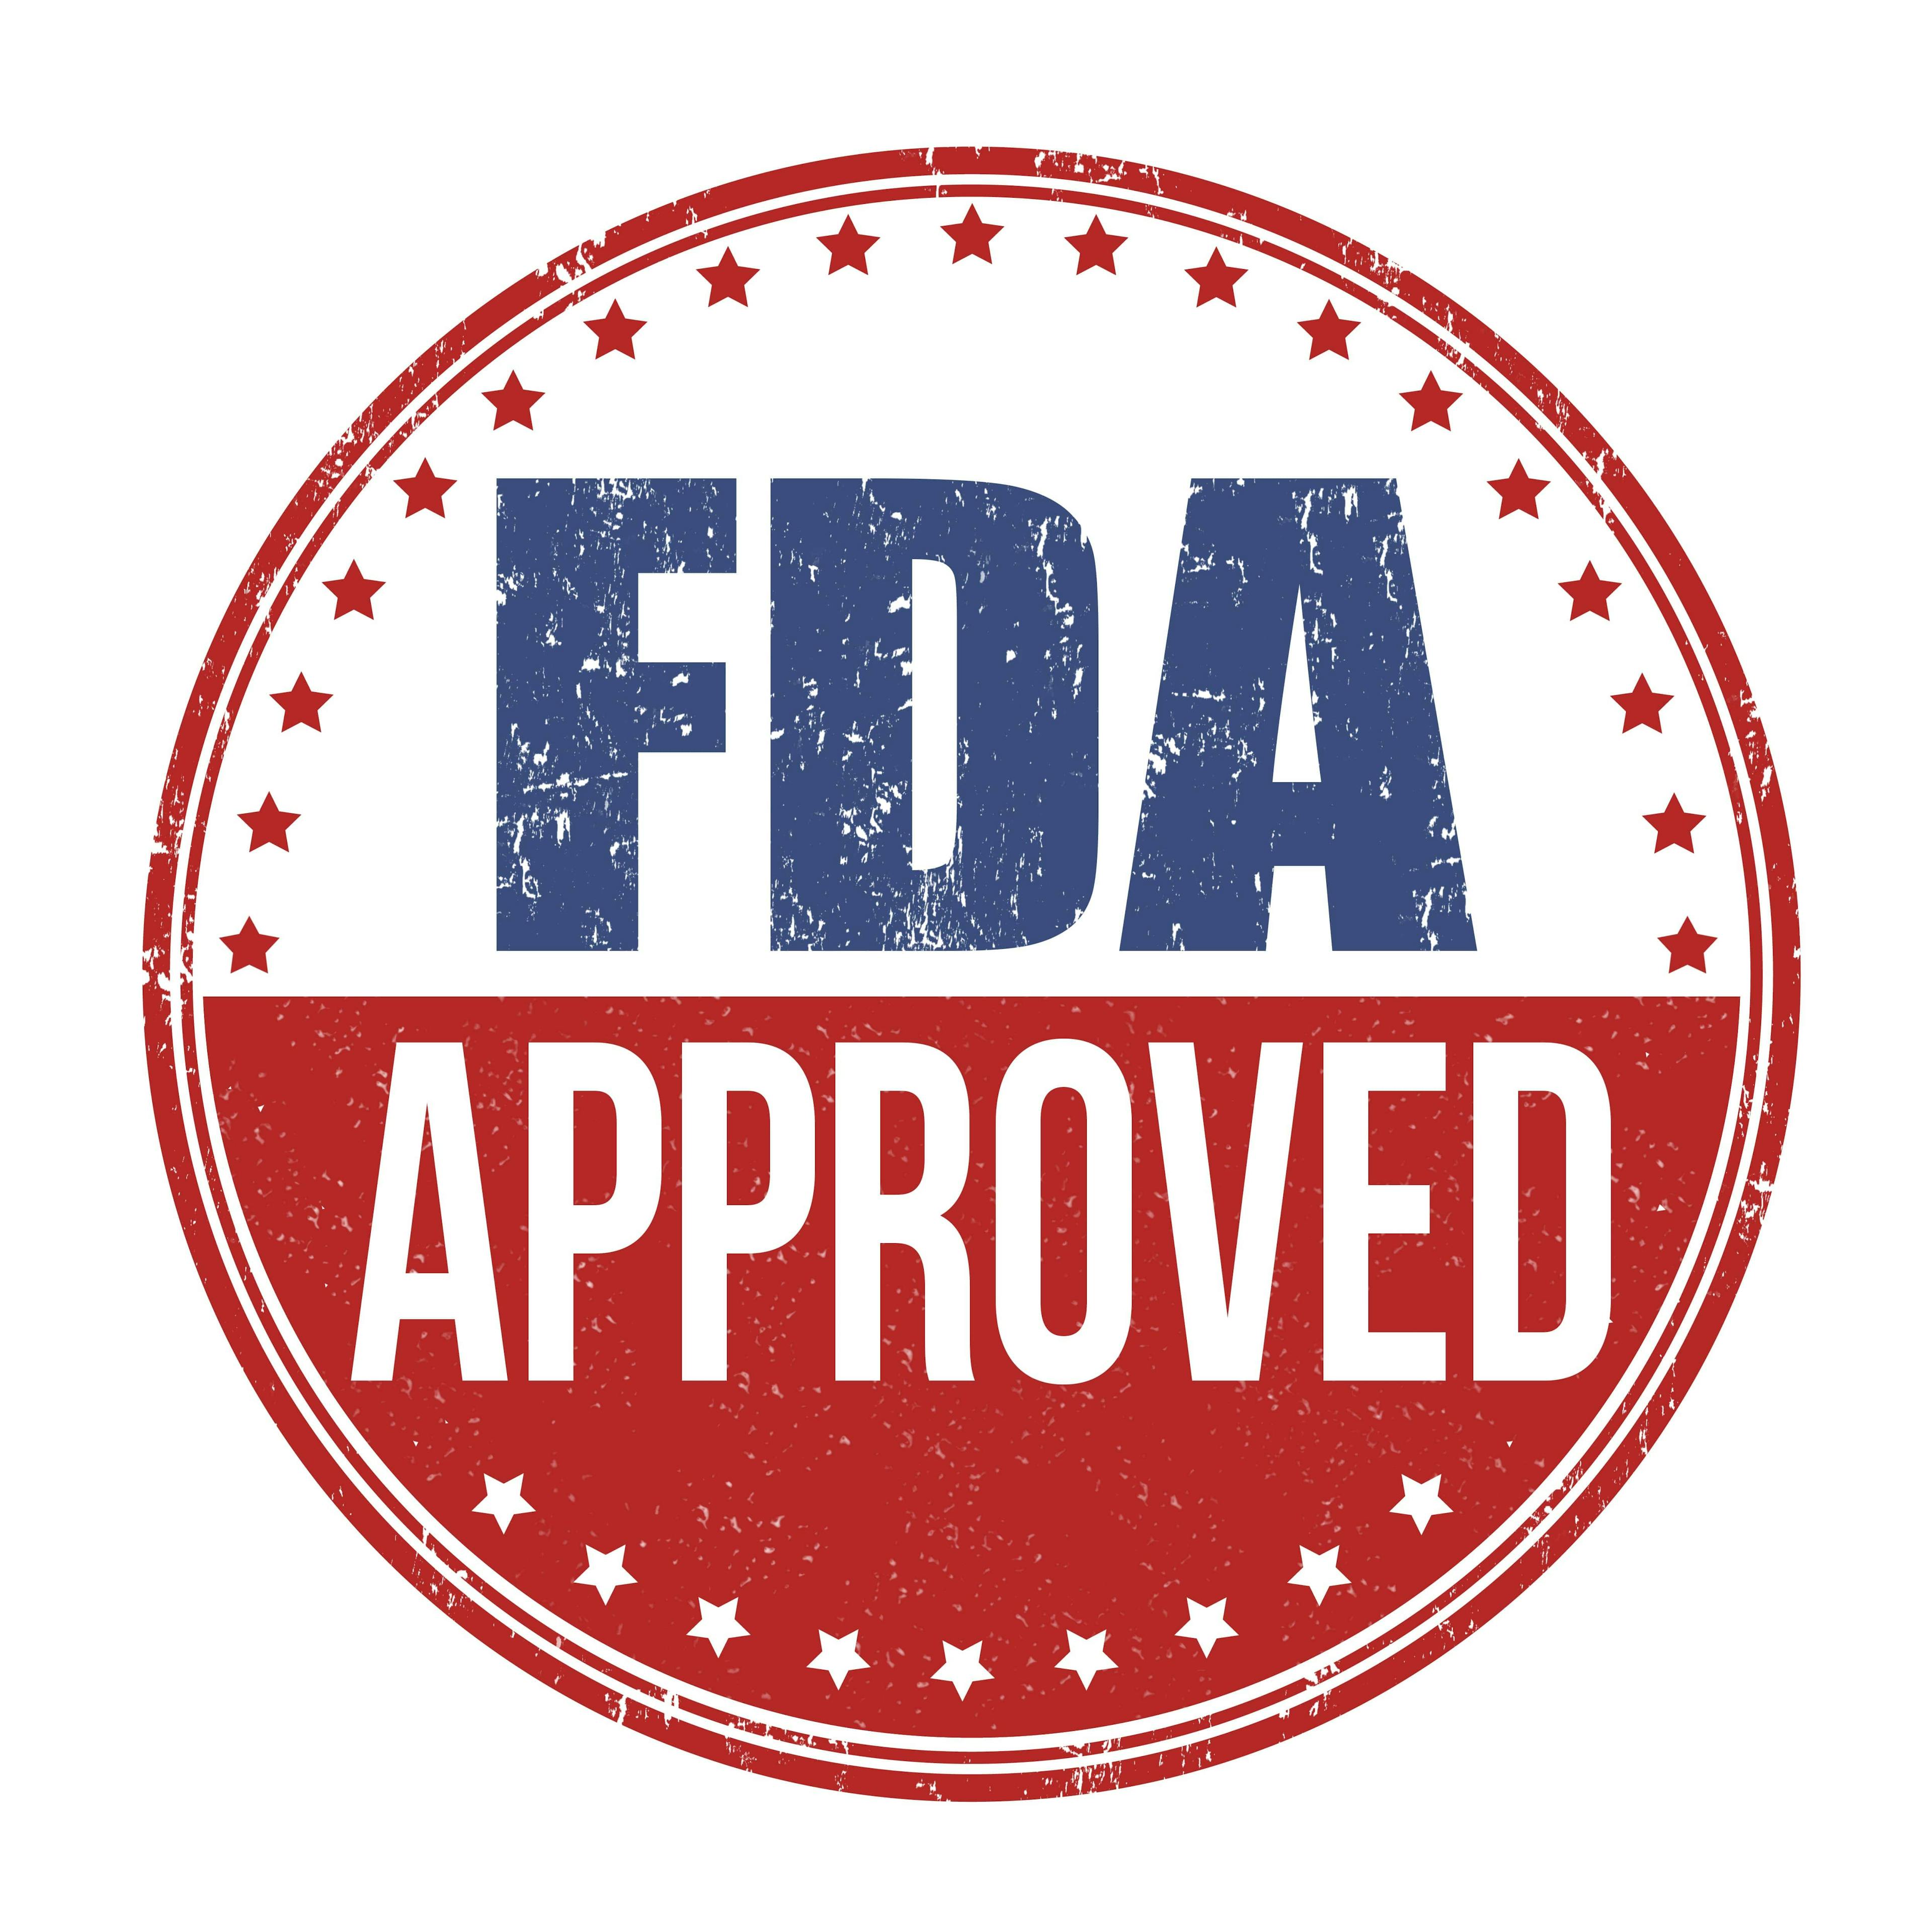 FDA Approves Sacituzumab Govitecan for Pre-Treated HR+/HER2- Metastatic Breast Cancer